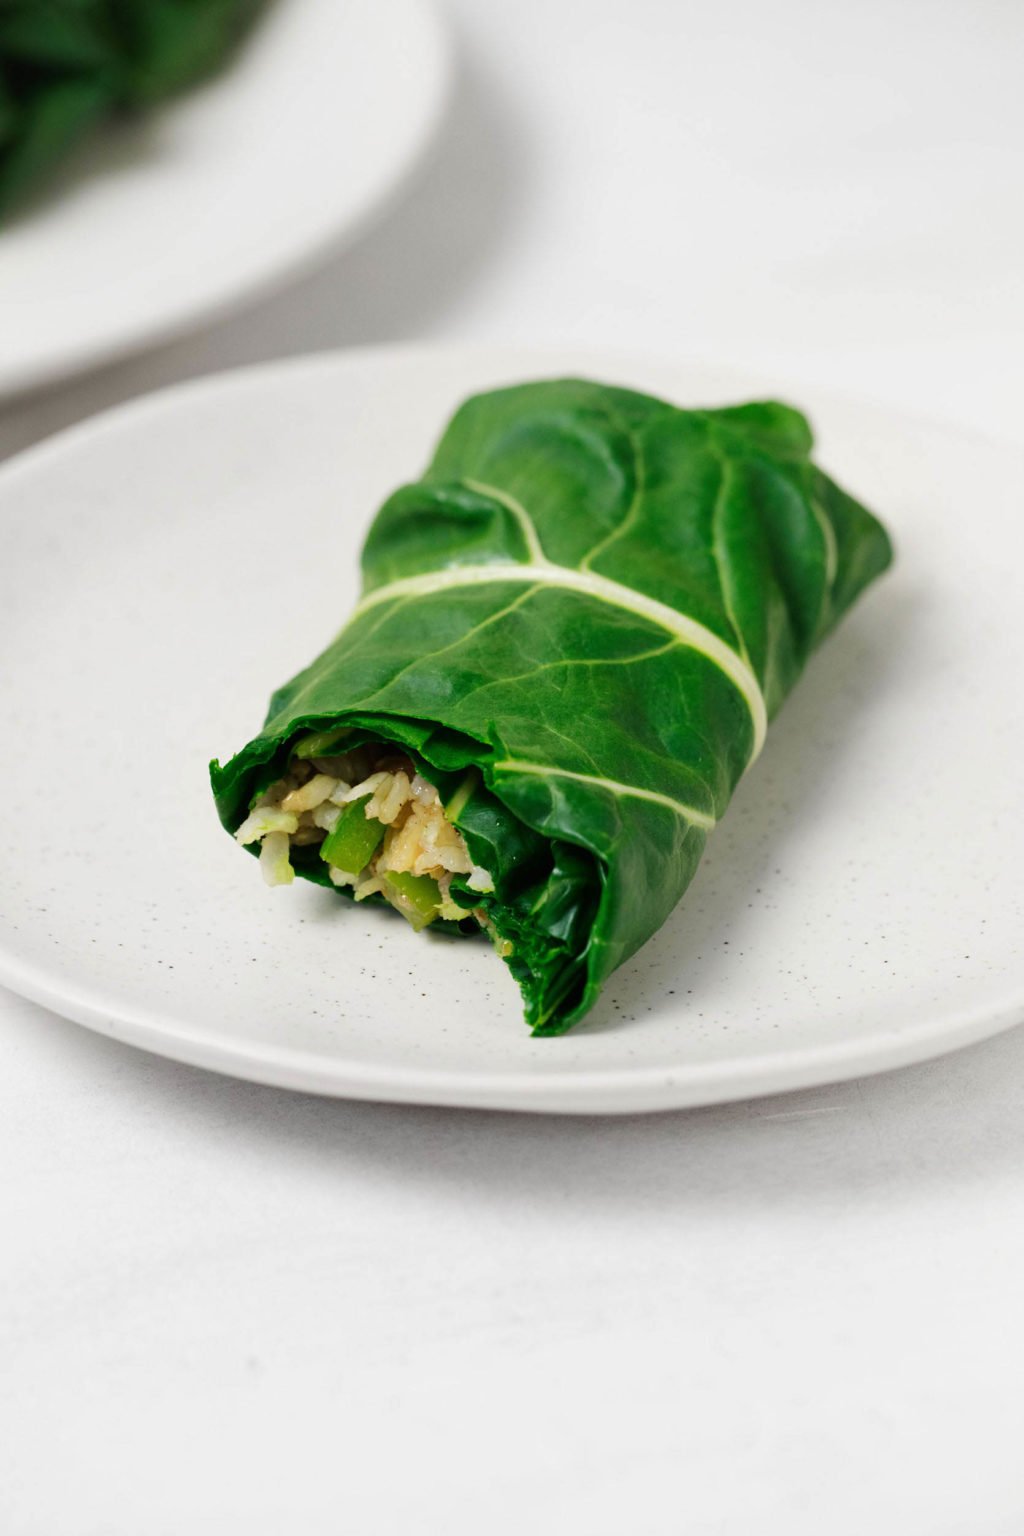 A collard green wrap, stuffed with rice and beans, is resting on a small white plate.